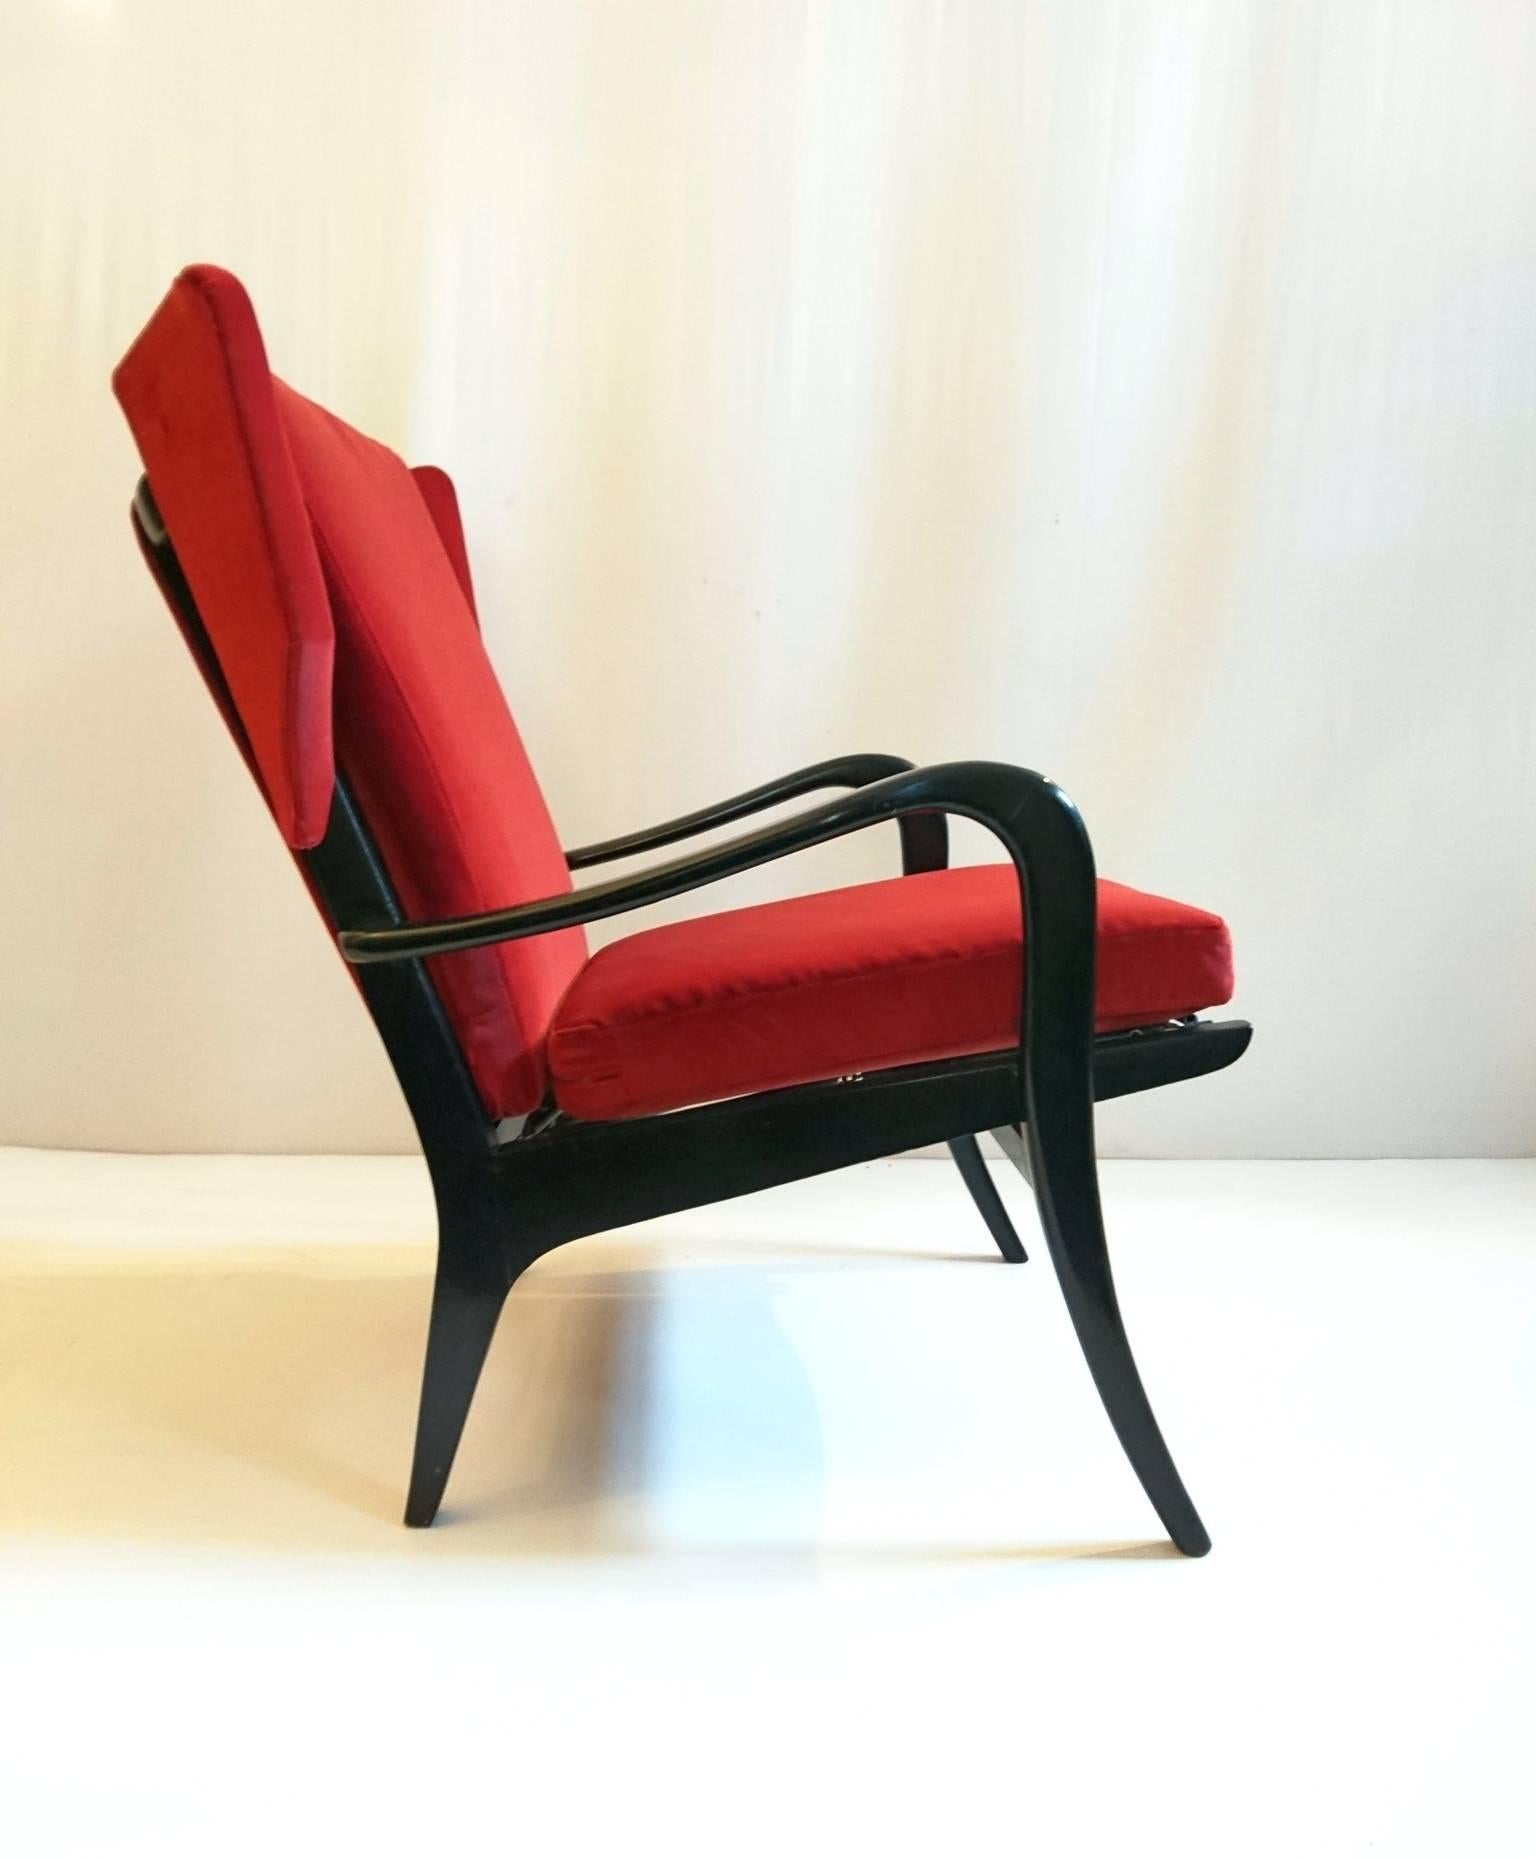 Elegant and comfortable armchair professionally restored in both construction and wood finish as well as upholstery. Jet black wood frame with the original Free-span patented system (see pic) with a warm red Italian cotton velvet.